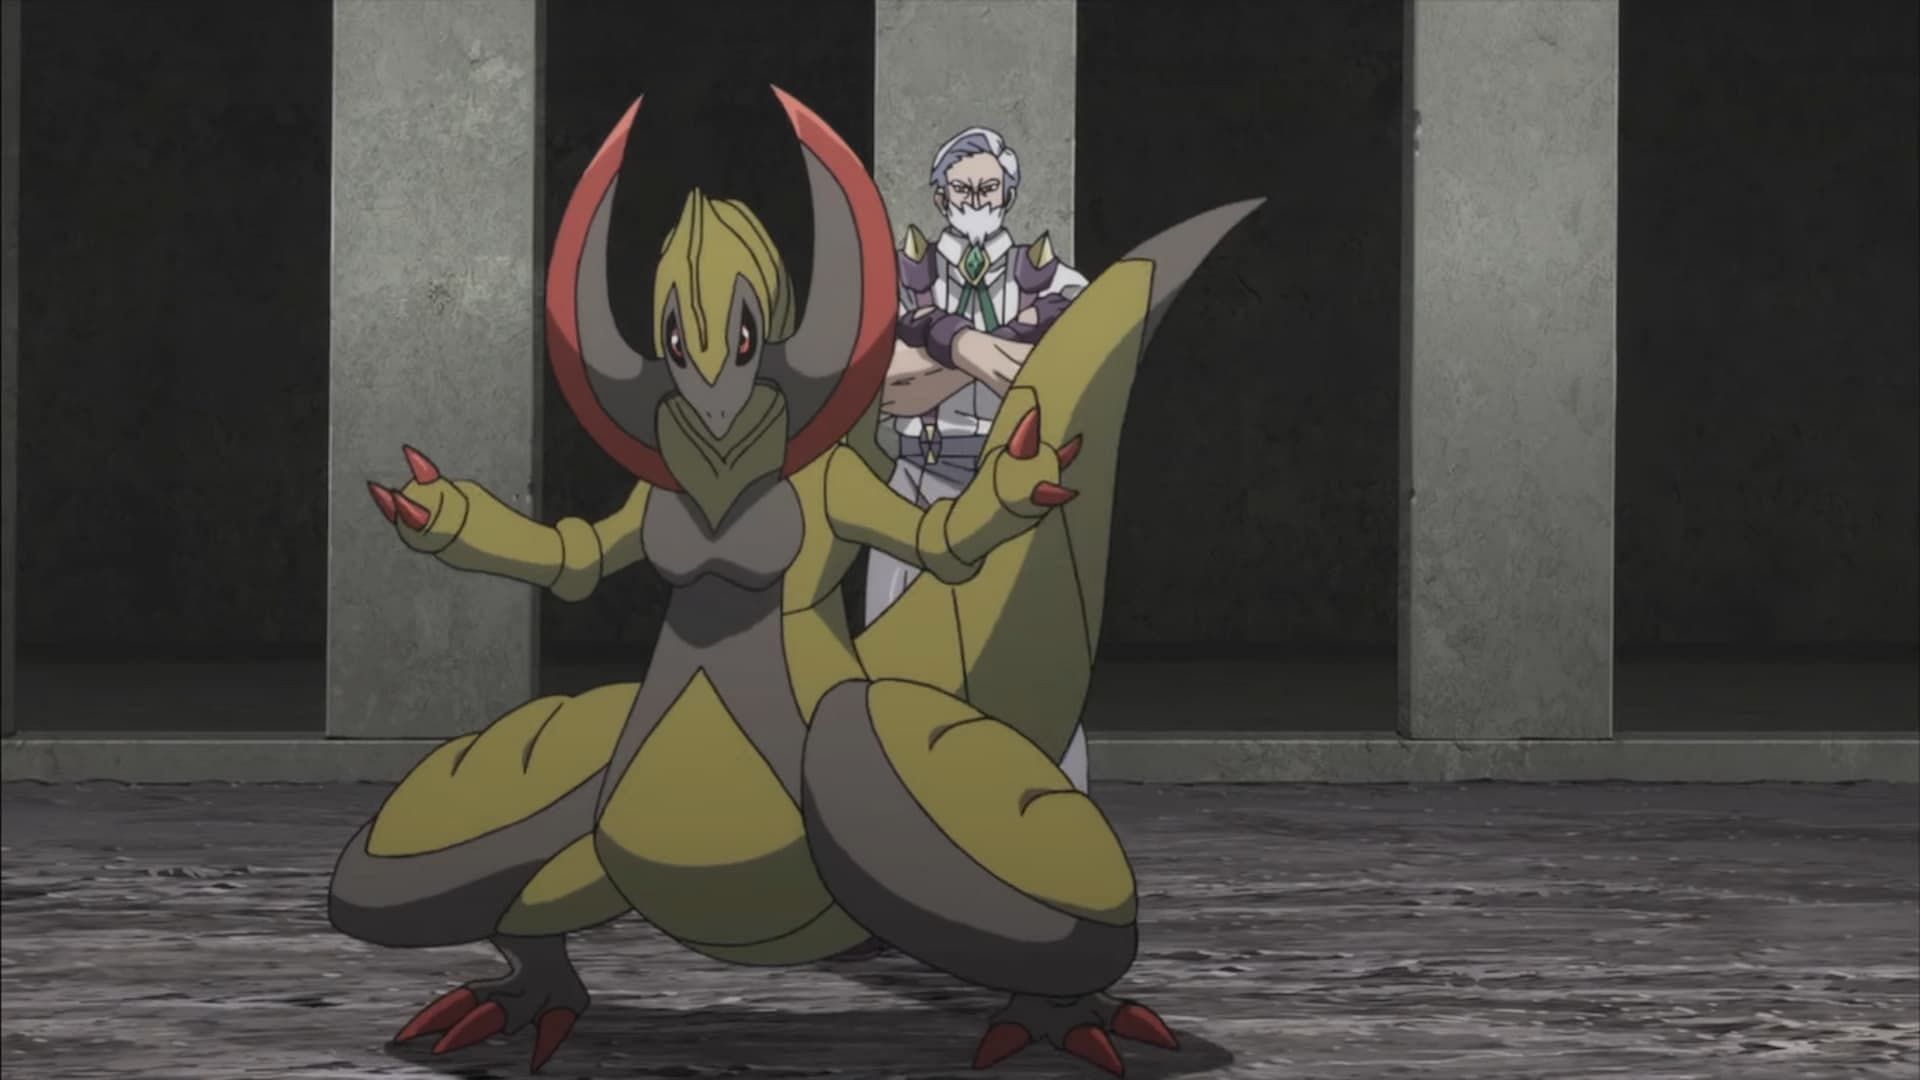 Haxorus from Pokemon Black and White in the anime (image via The Pokemon Company)